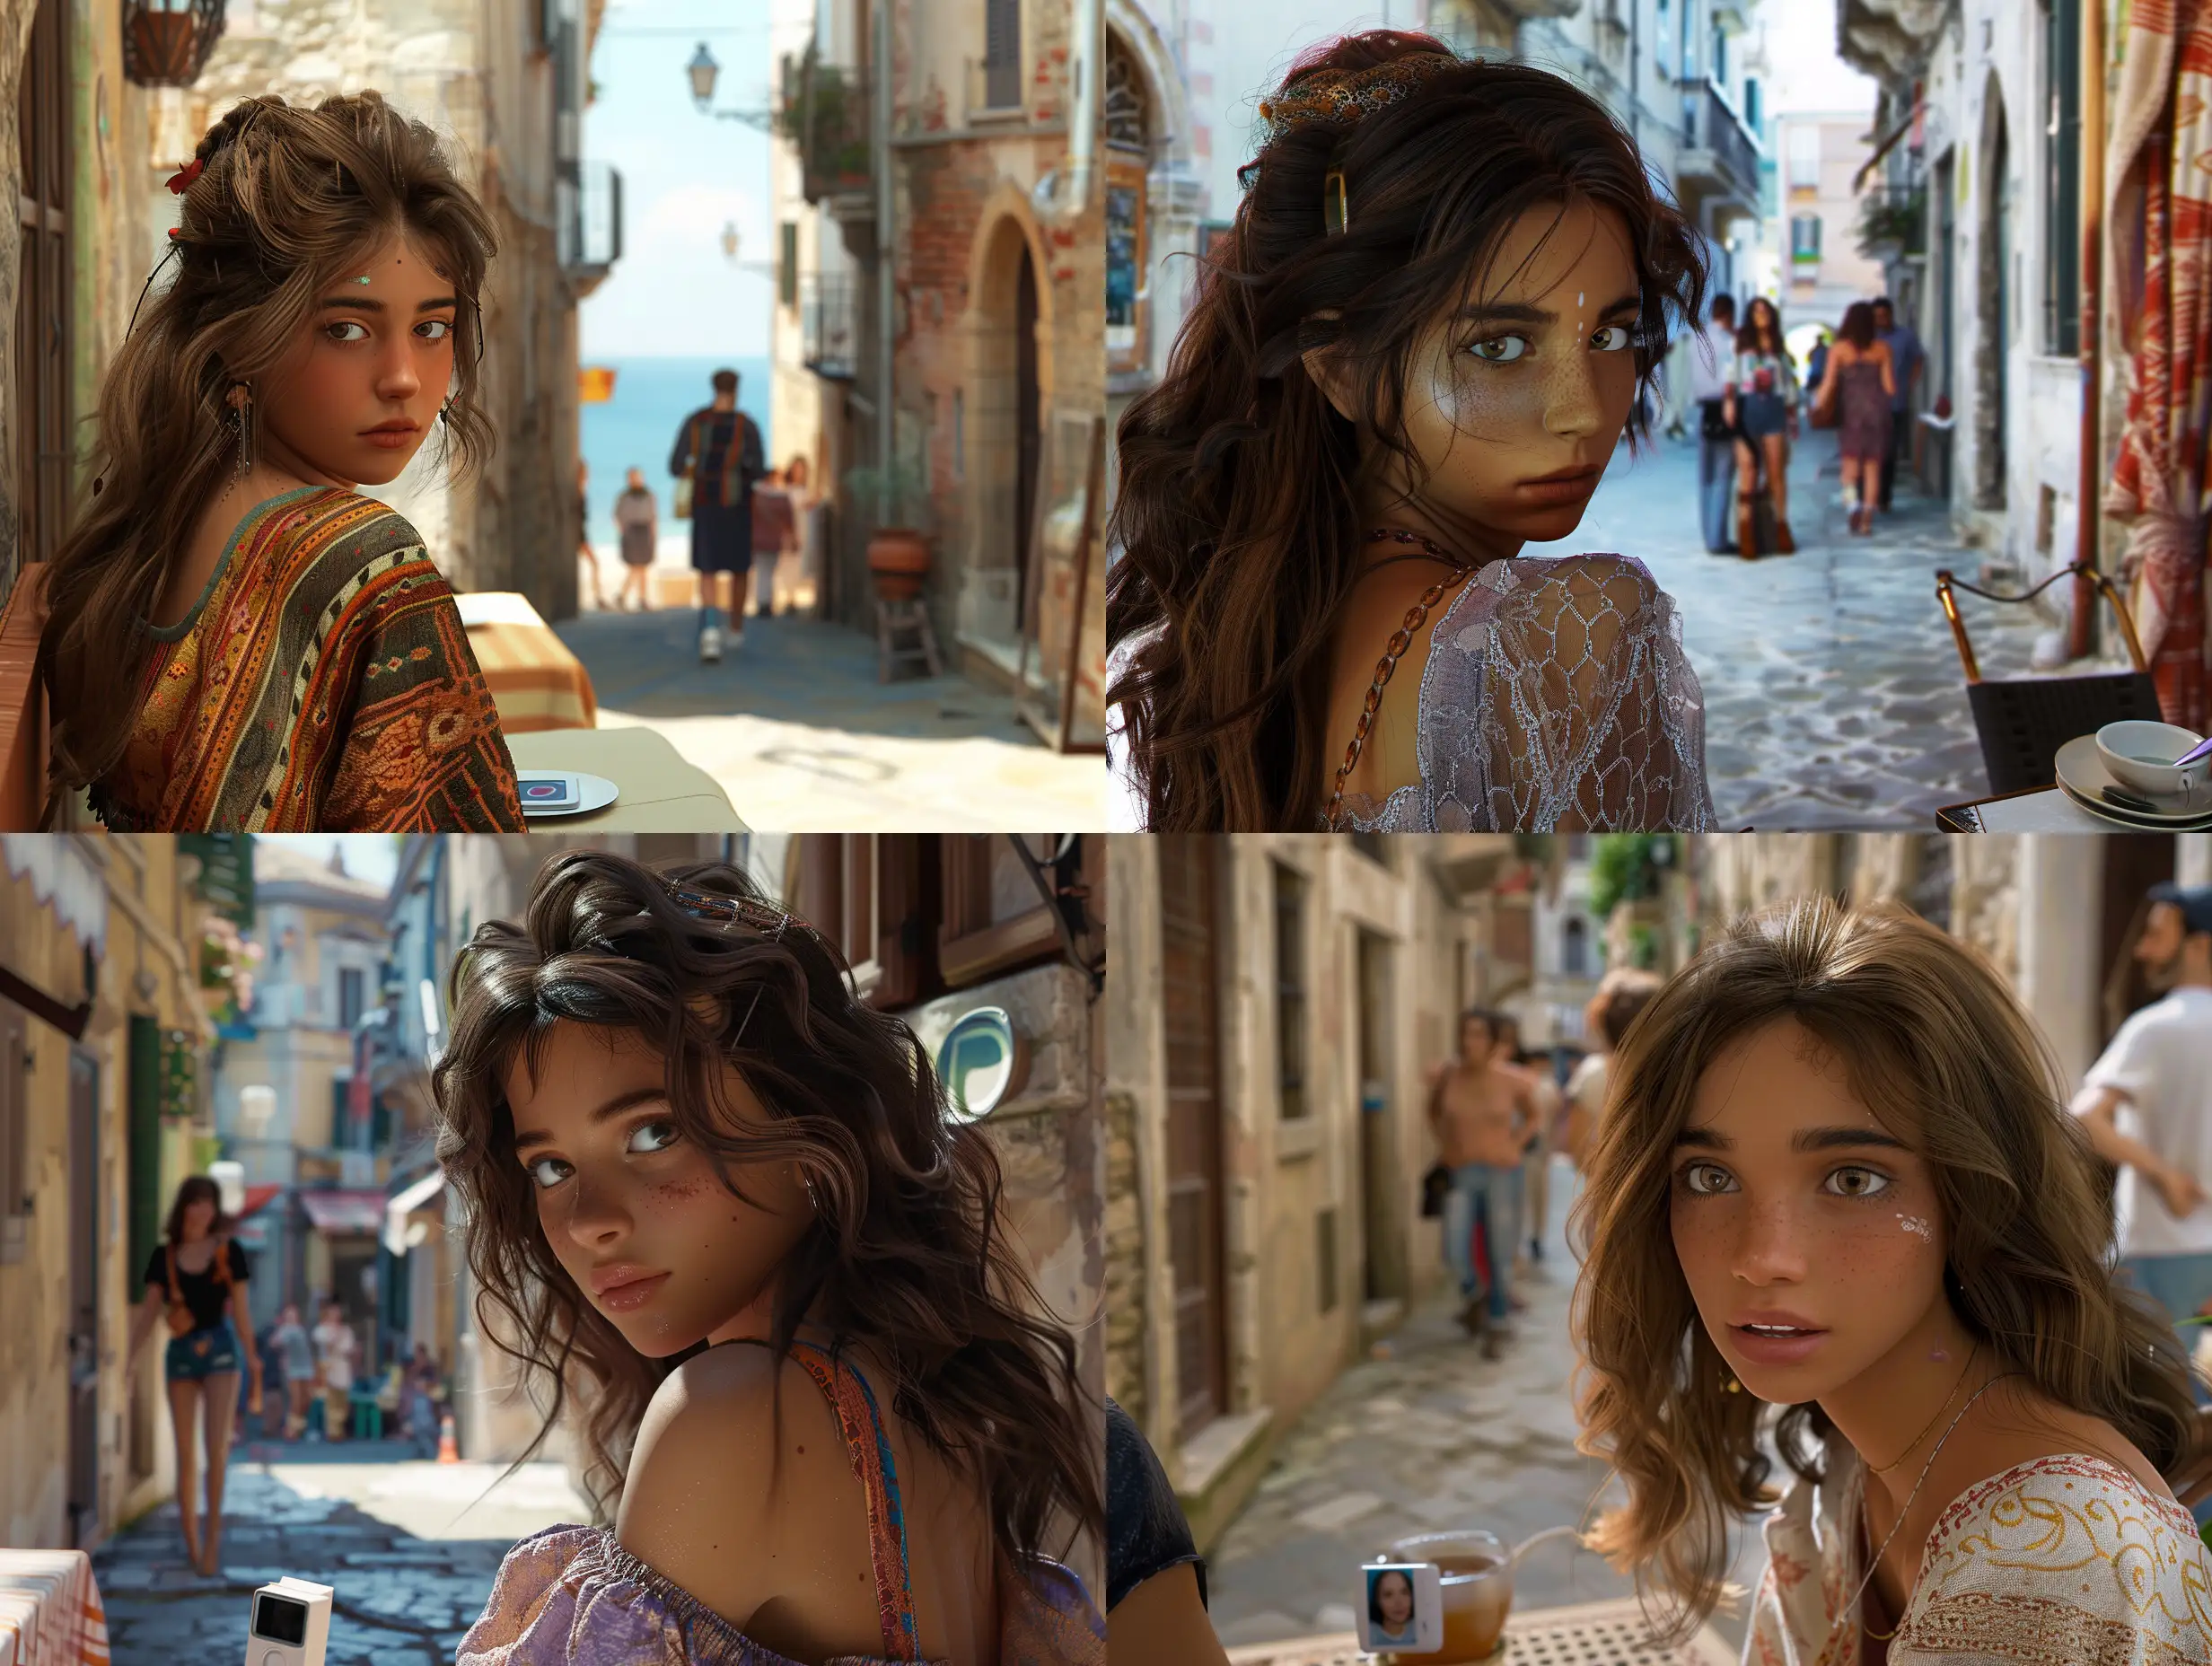 A girl with gypsy brown hair and Arab features is in a cafe and looking at passers-by in an alley in Italy, in a very realistic scene., Landscape, Classicism, Cinema 4D, Panoramic perspective, Muted Colors, Coastal Beach, Instant Camera, Dramatic Lighting, Love‎,,